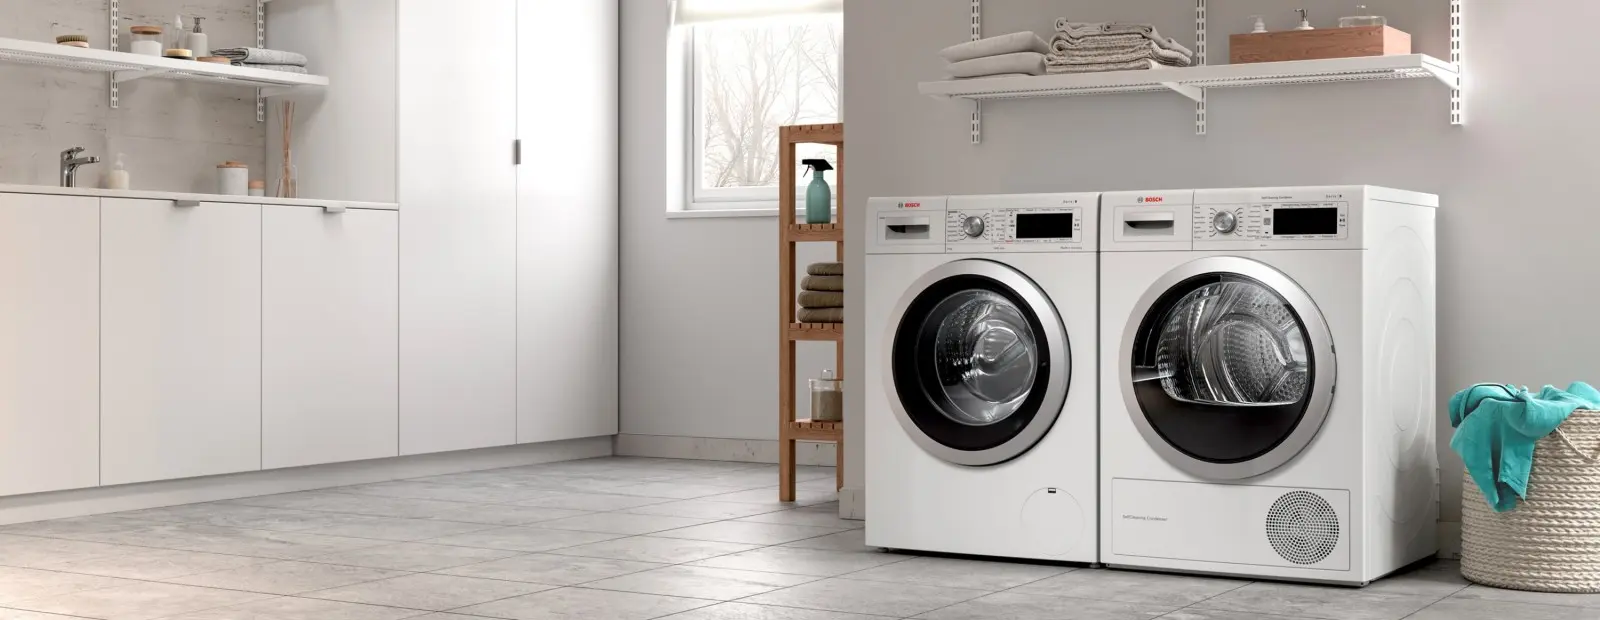 Bosch selfcleaning condensor